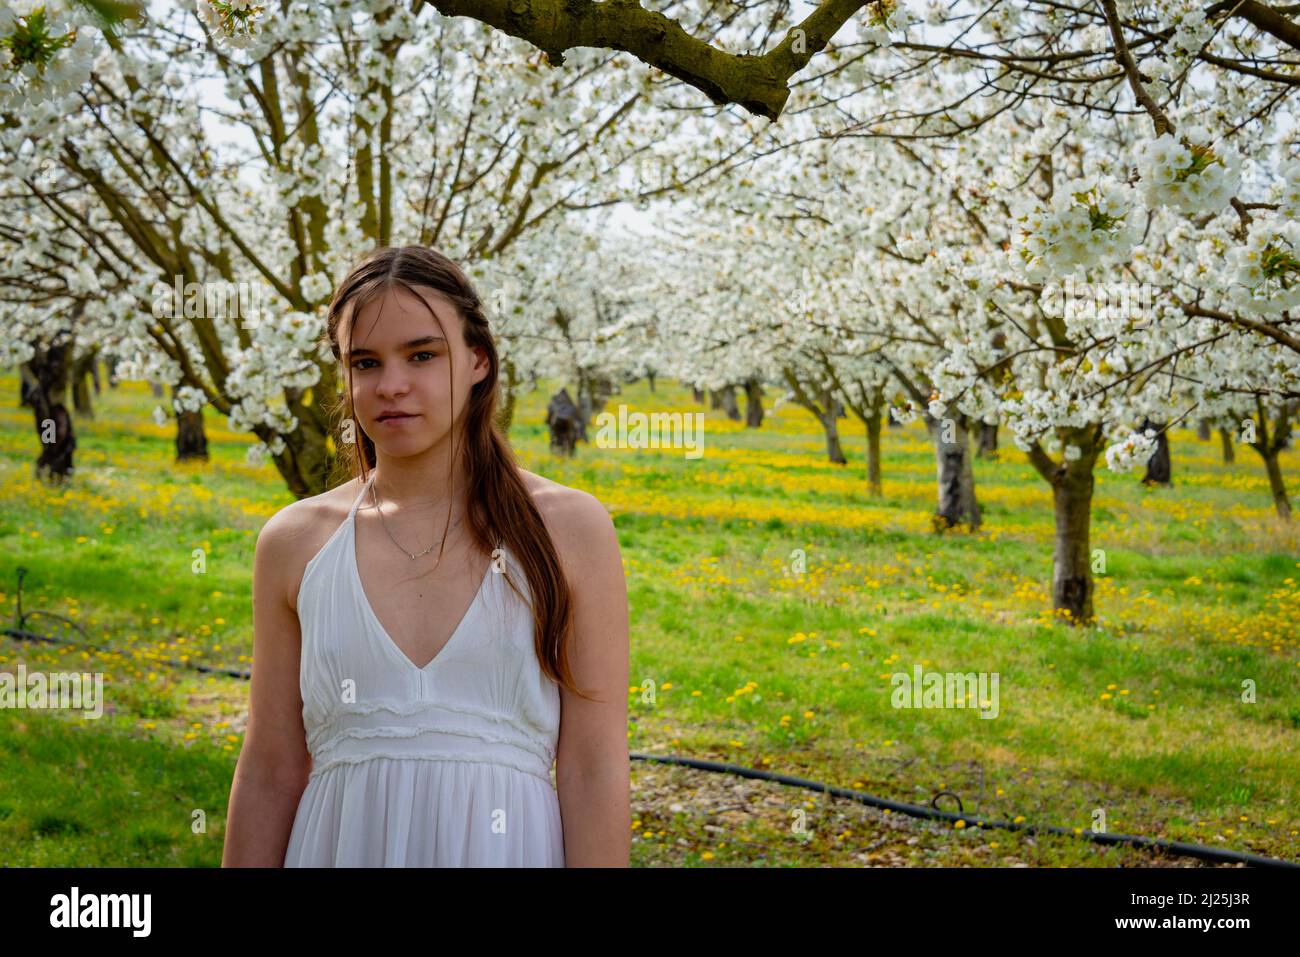 portrait of a young woman wearing a white dress  in  a cherry orchard with trees in blossom. spring summer image . Stock Photo